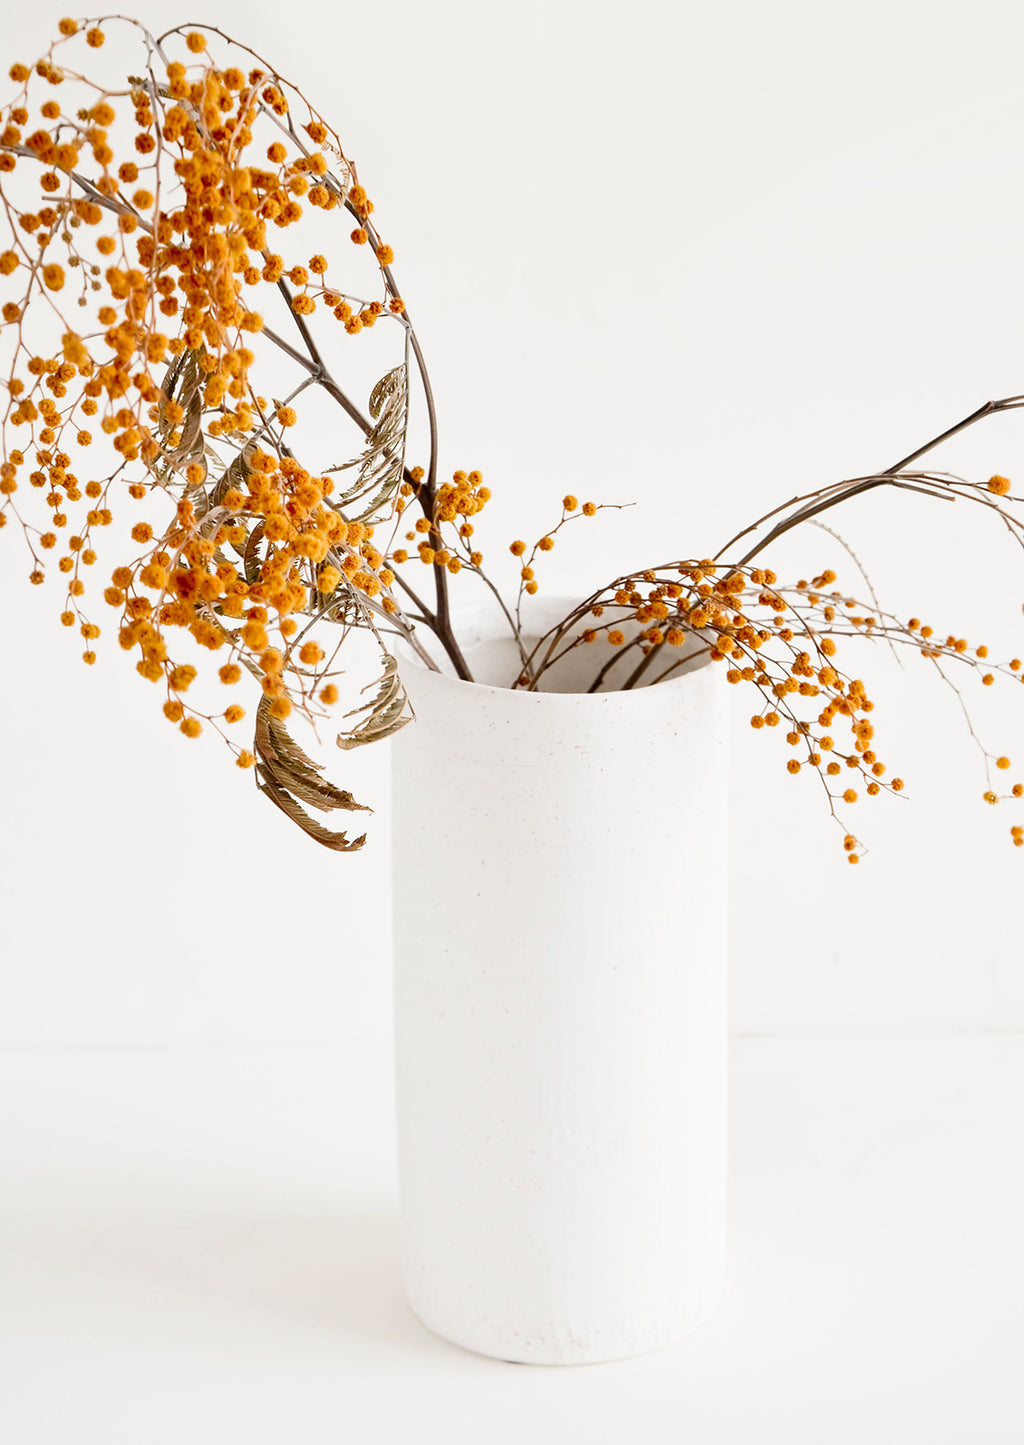 Tall: Tall and narrow cylindrical vase in white concrete material, displaying dried mimosa